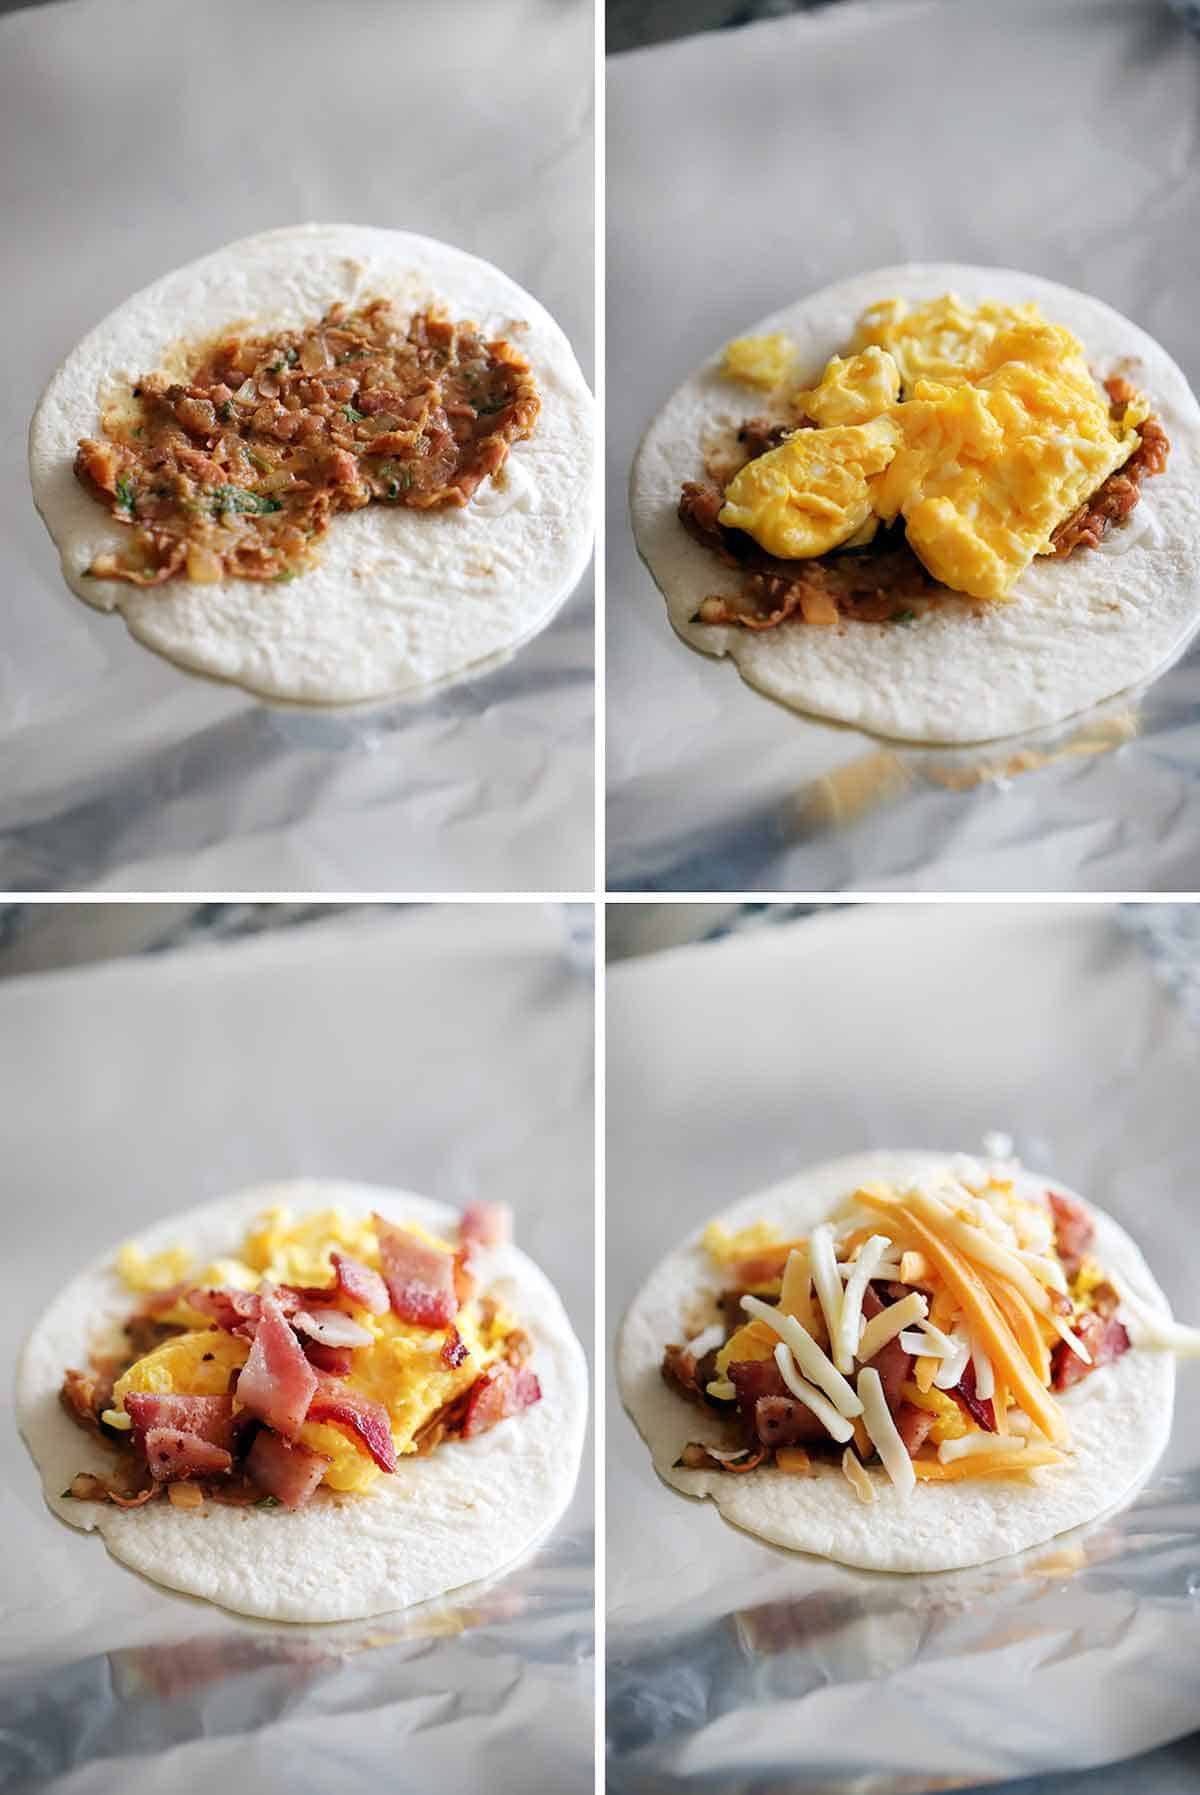 Process collage showing layering ingredients for breakfast tacos in a flour tortilla on a piece of foil.